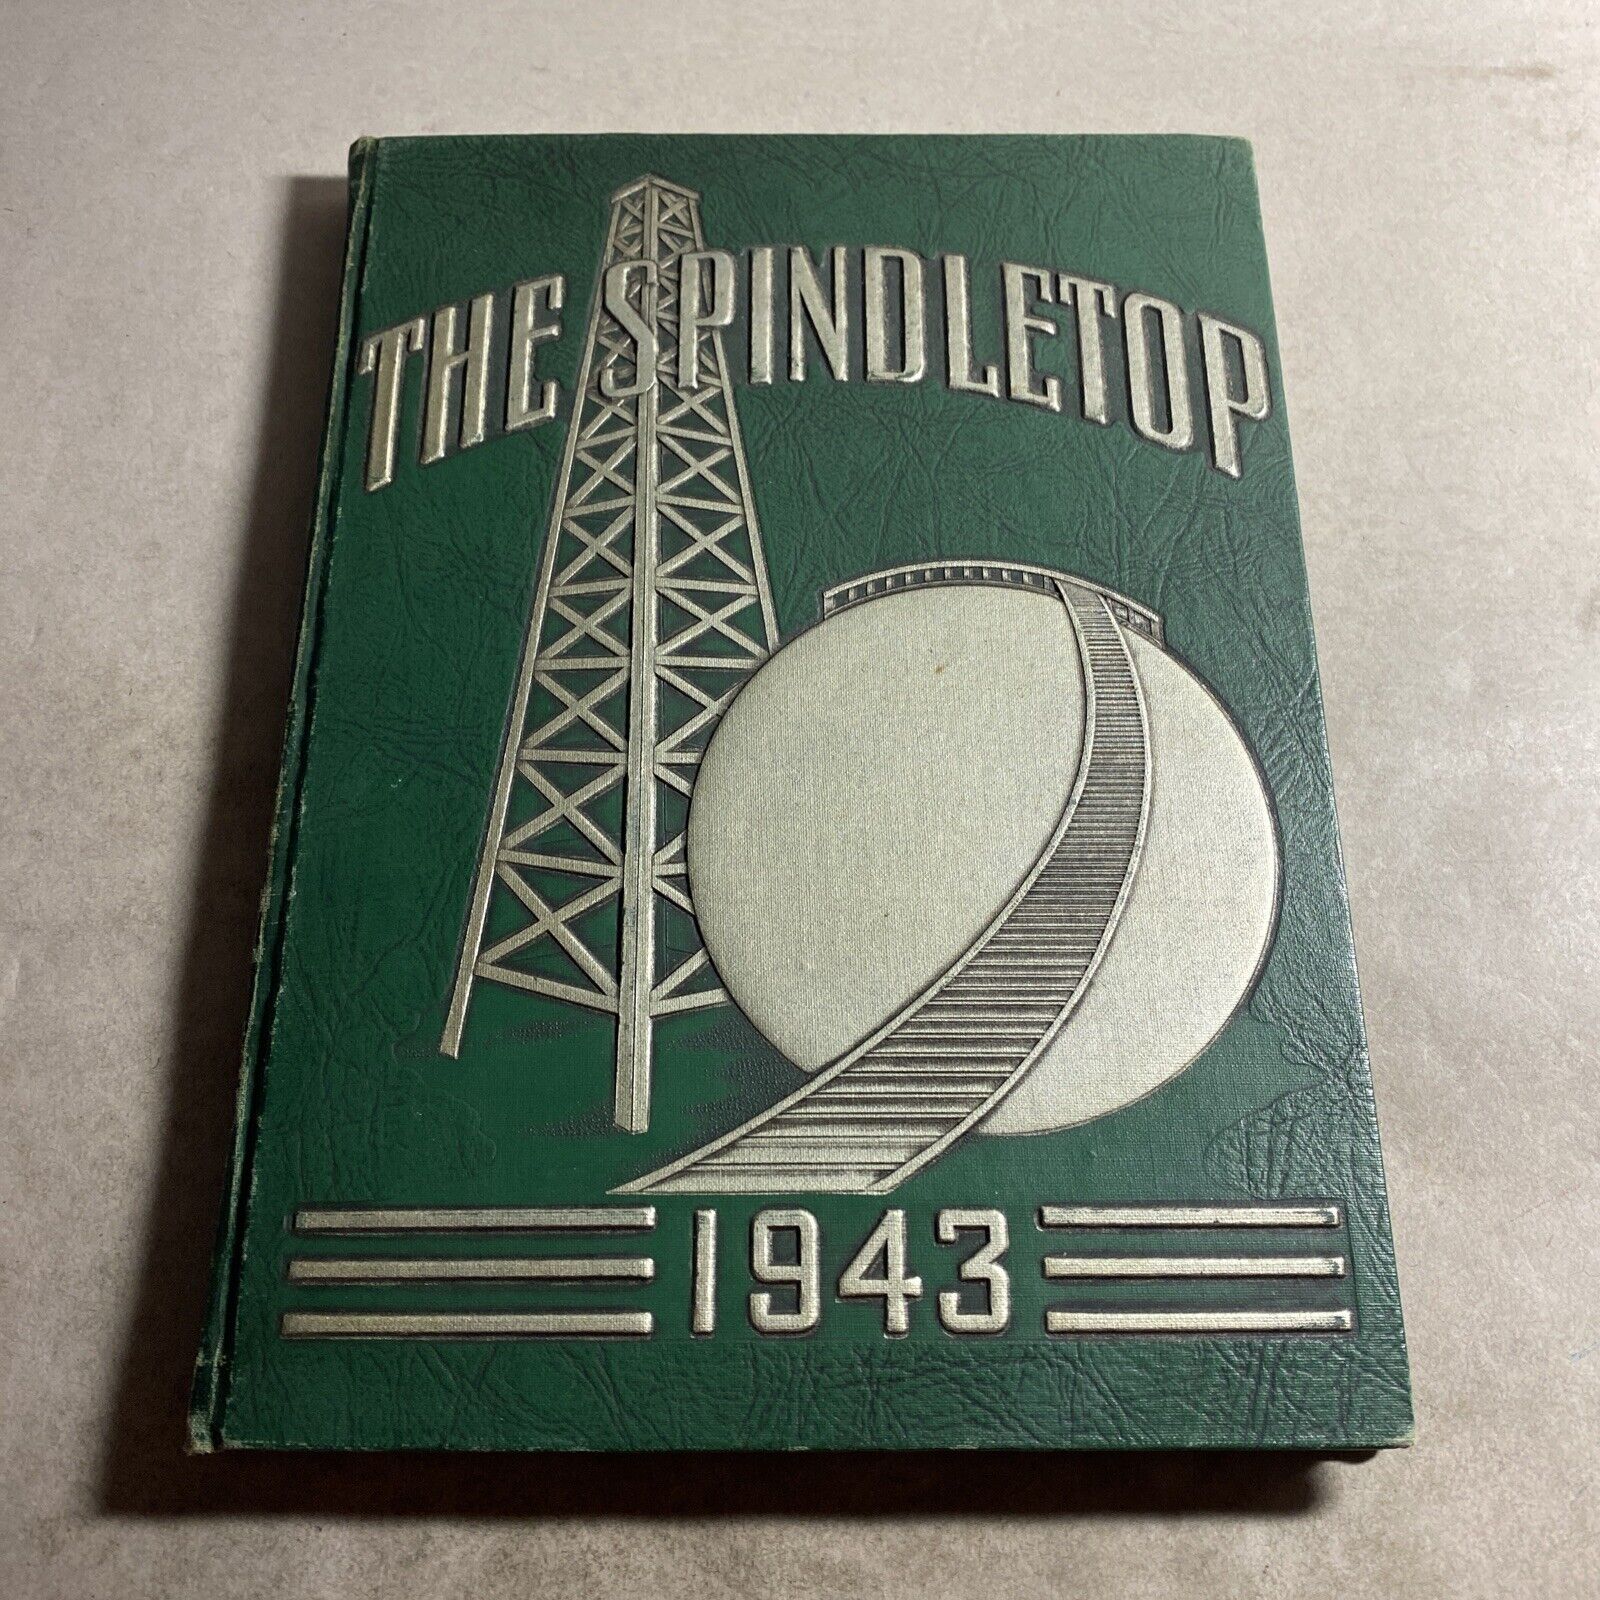 Vintage Yearbook: Spindletop 1943 - South Park High School, Texas / ETS